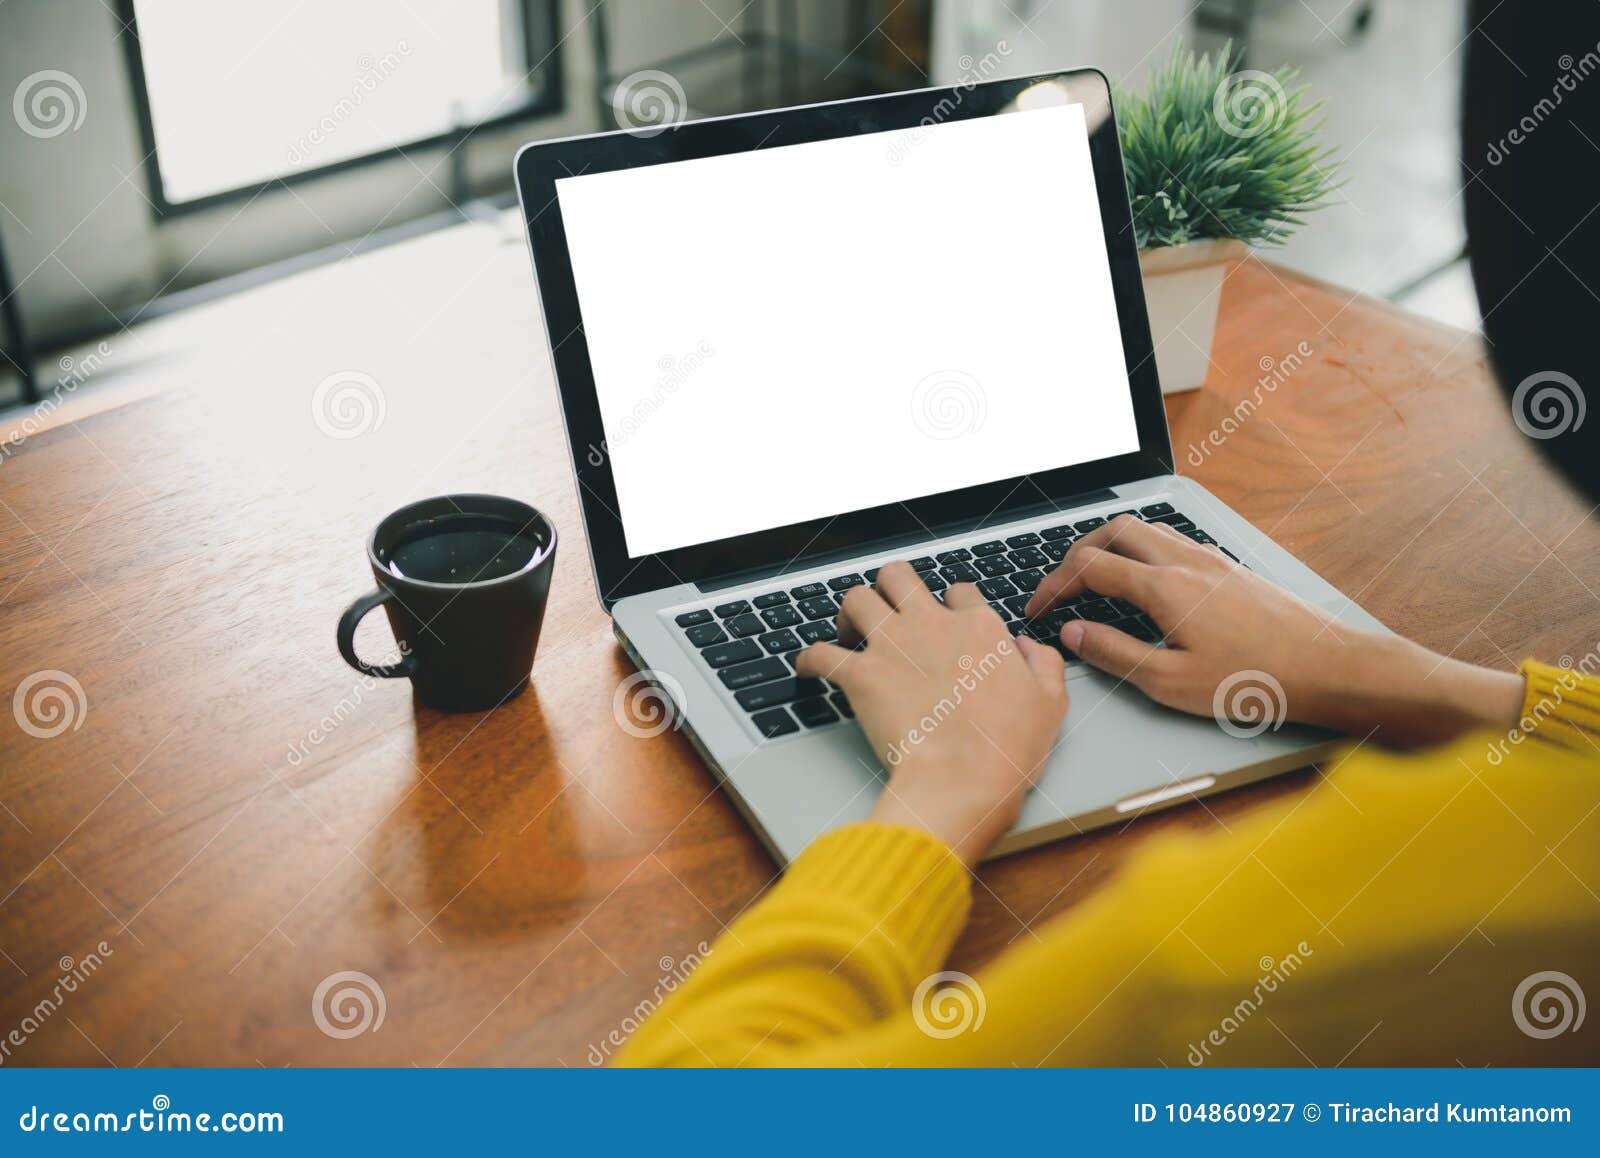 digital lifestyle working outside office. woman hands typing laptop computer with blank screen on table in coffee shop.